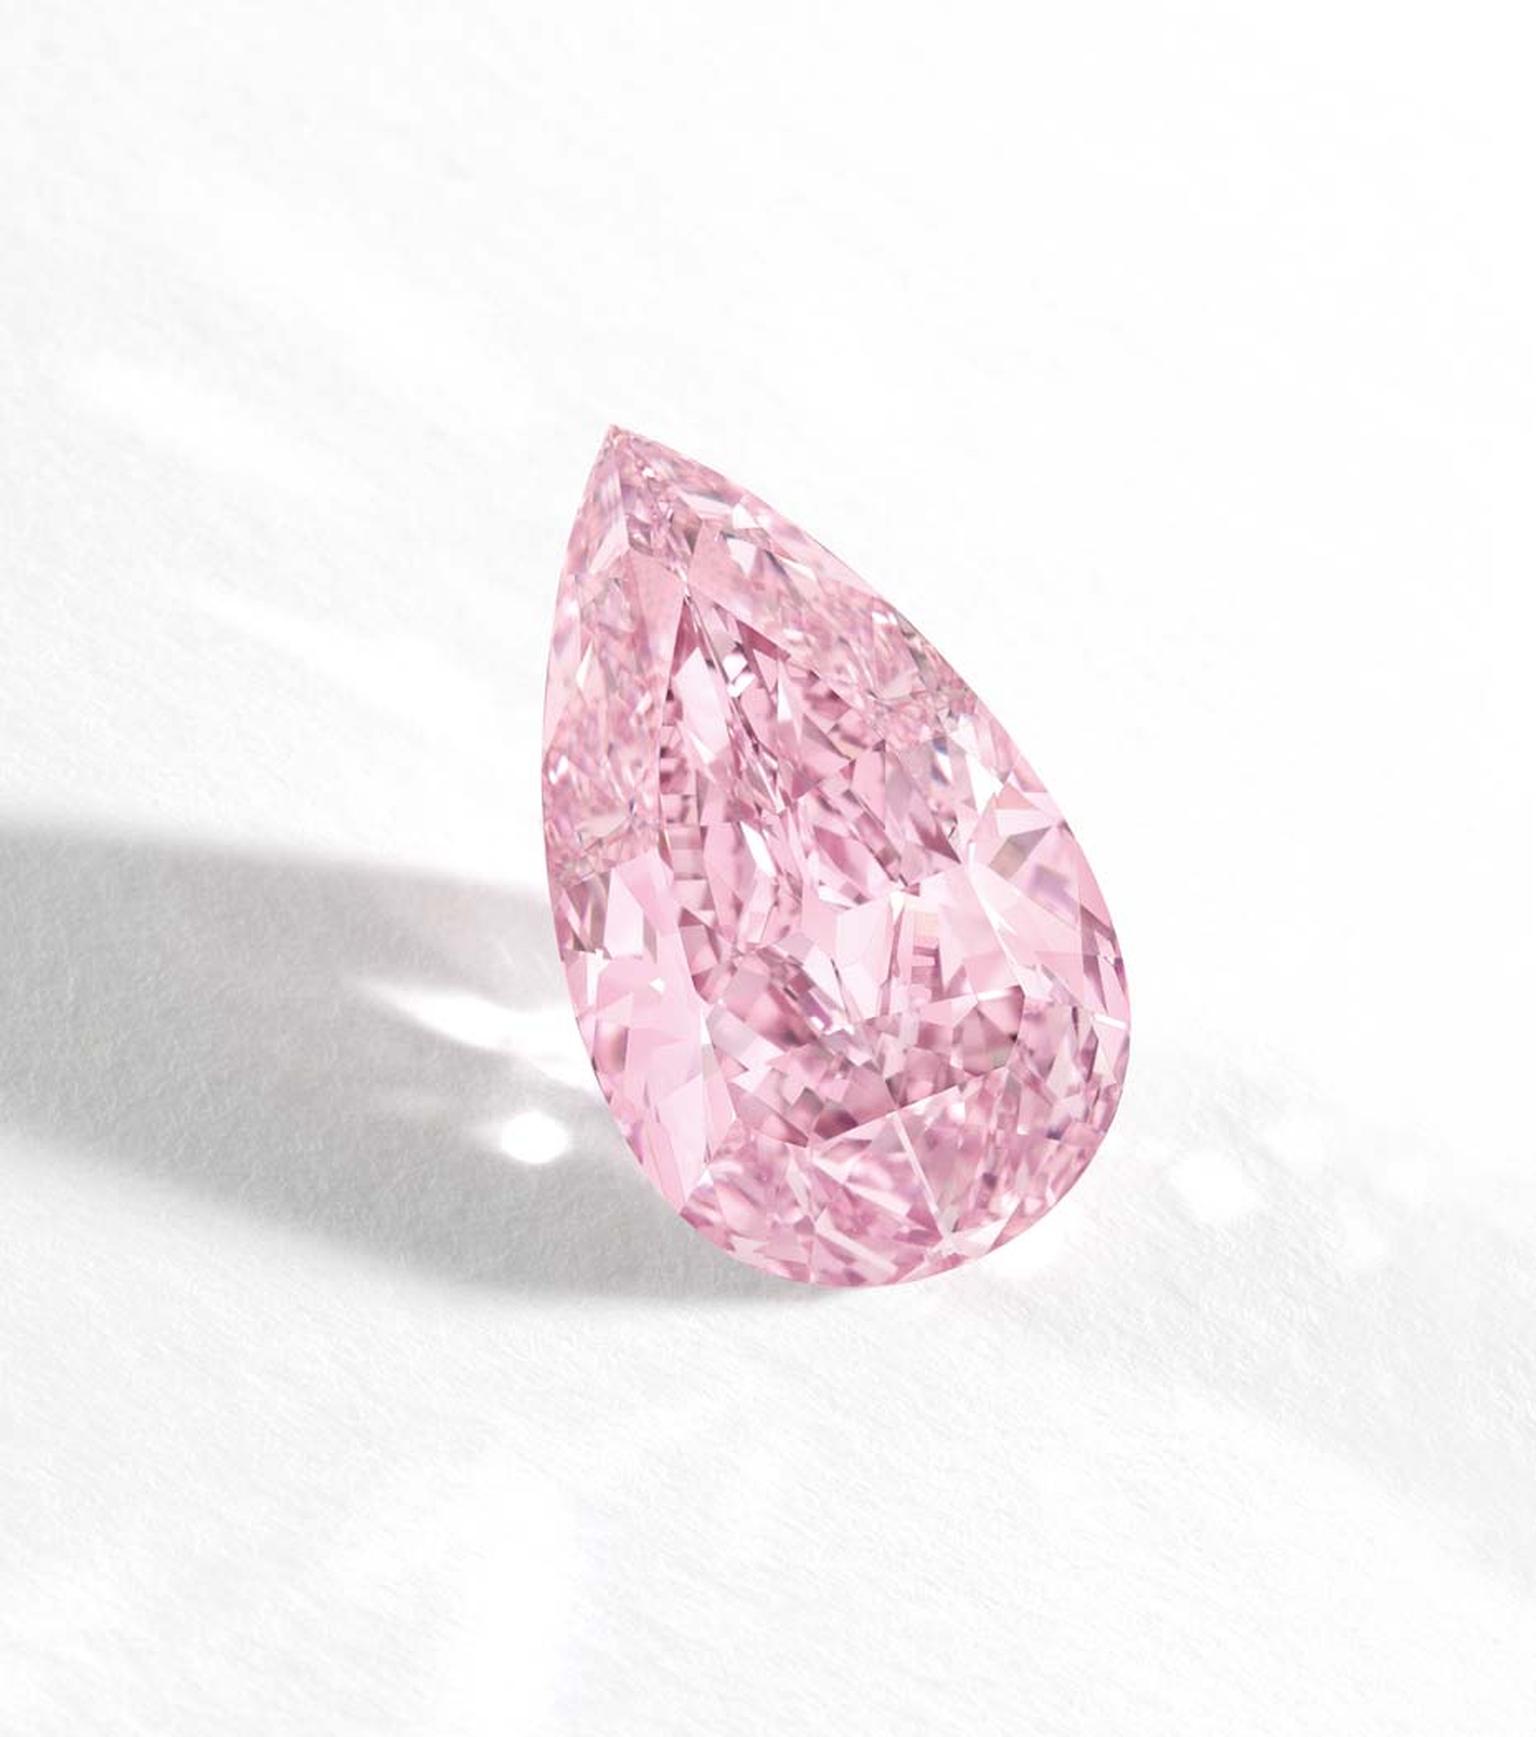 What Makes Pink Diamonds So Valuable, Jewelry